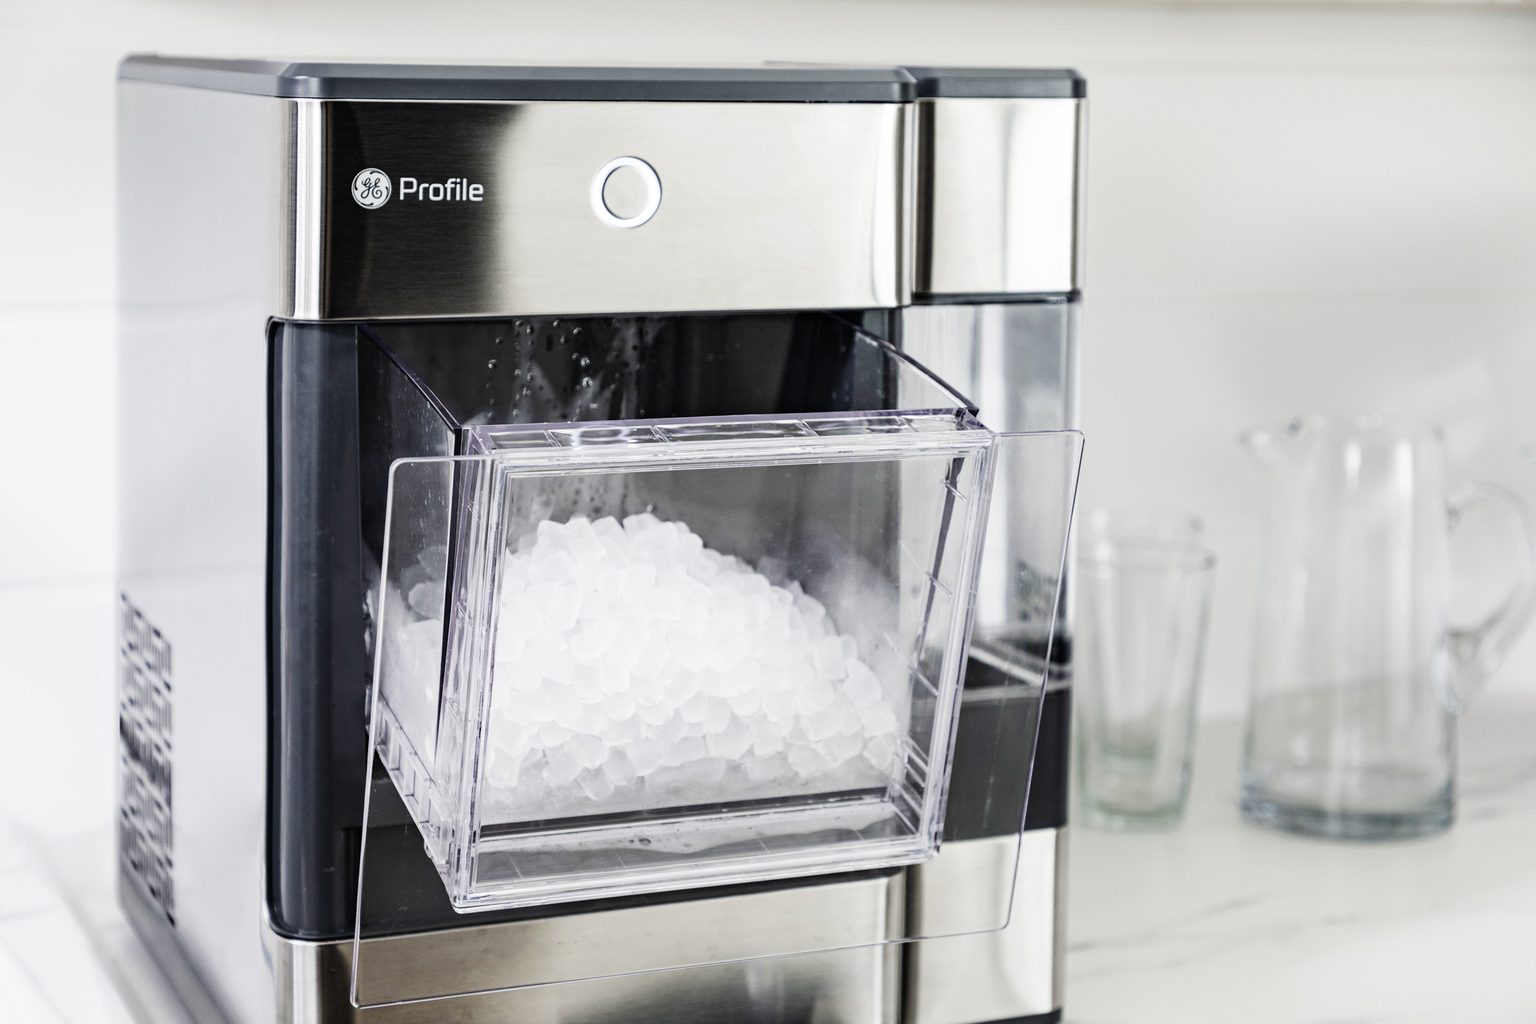 Upstreman 33 lbs Nugget Ice Maker with Chewable Pebble Ice & Fast Ice Making| Nugget Ice Machine for Home & Kitchen- X90 Pro